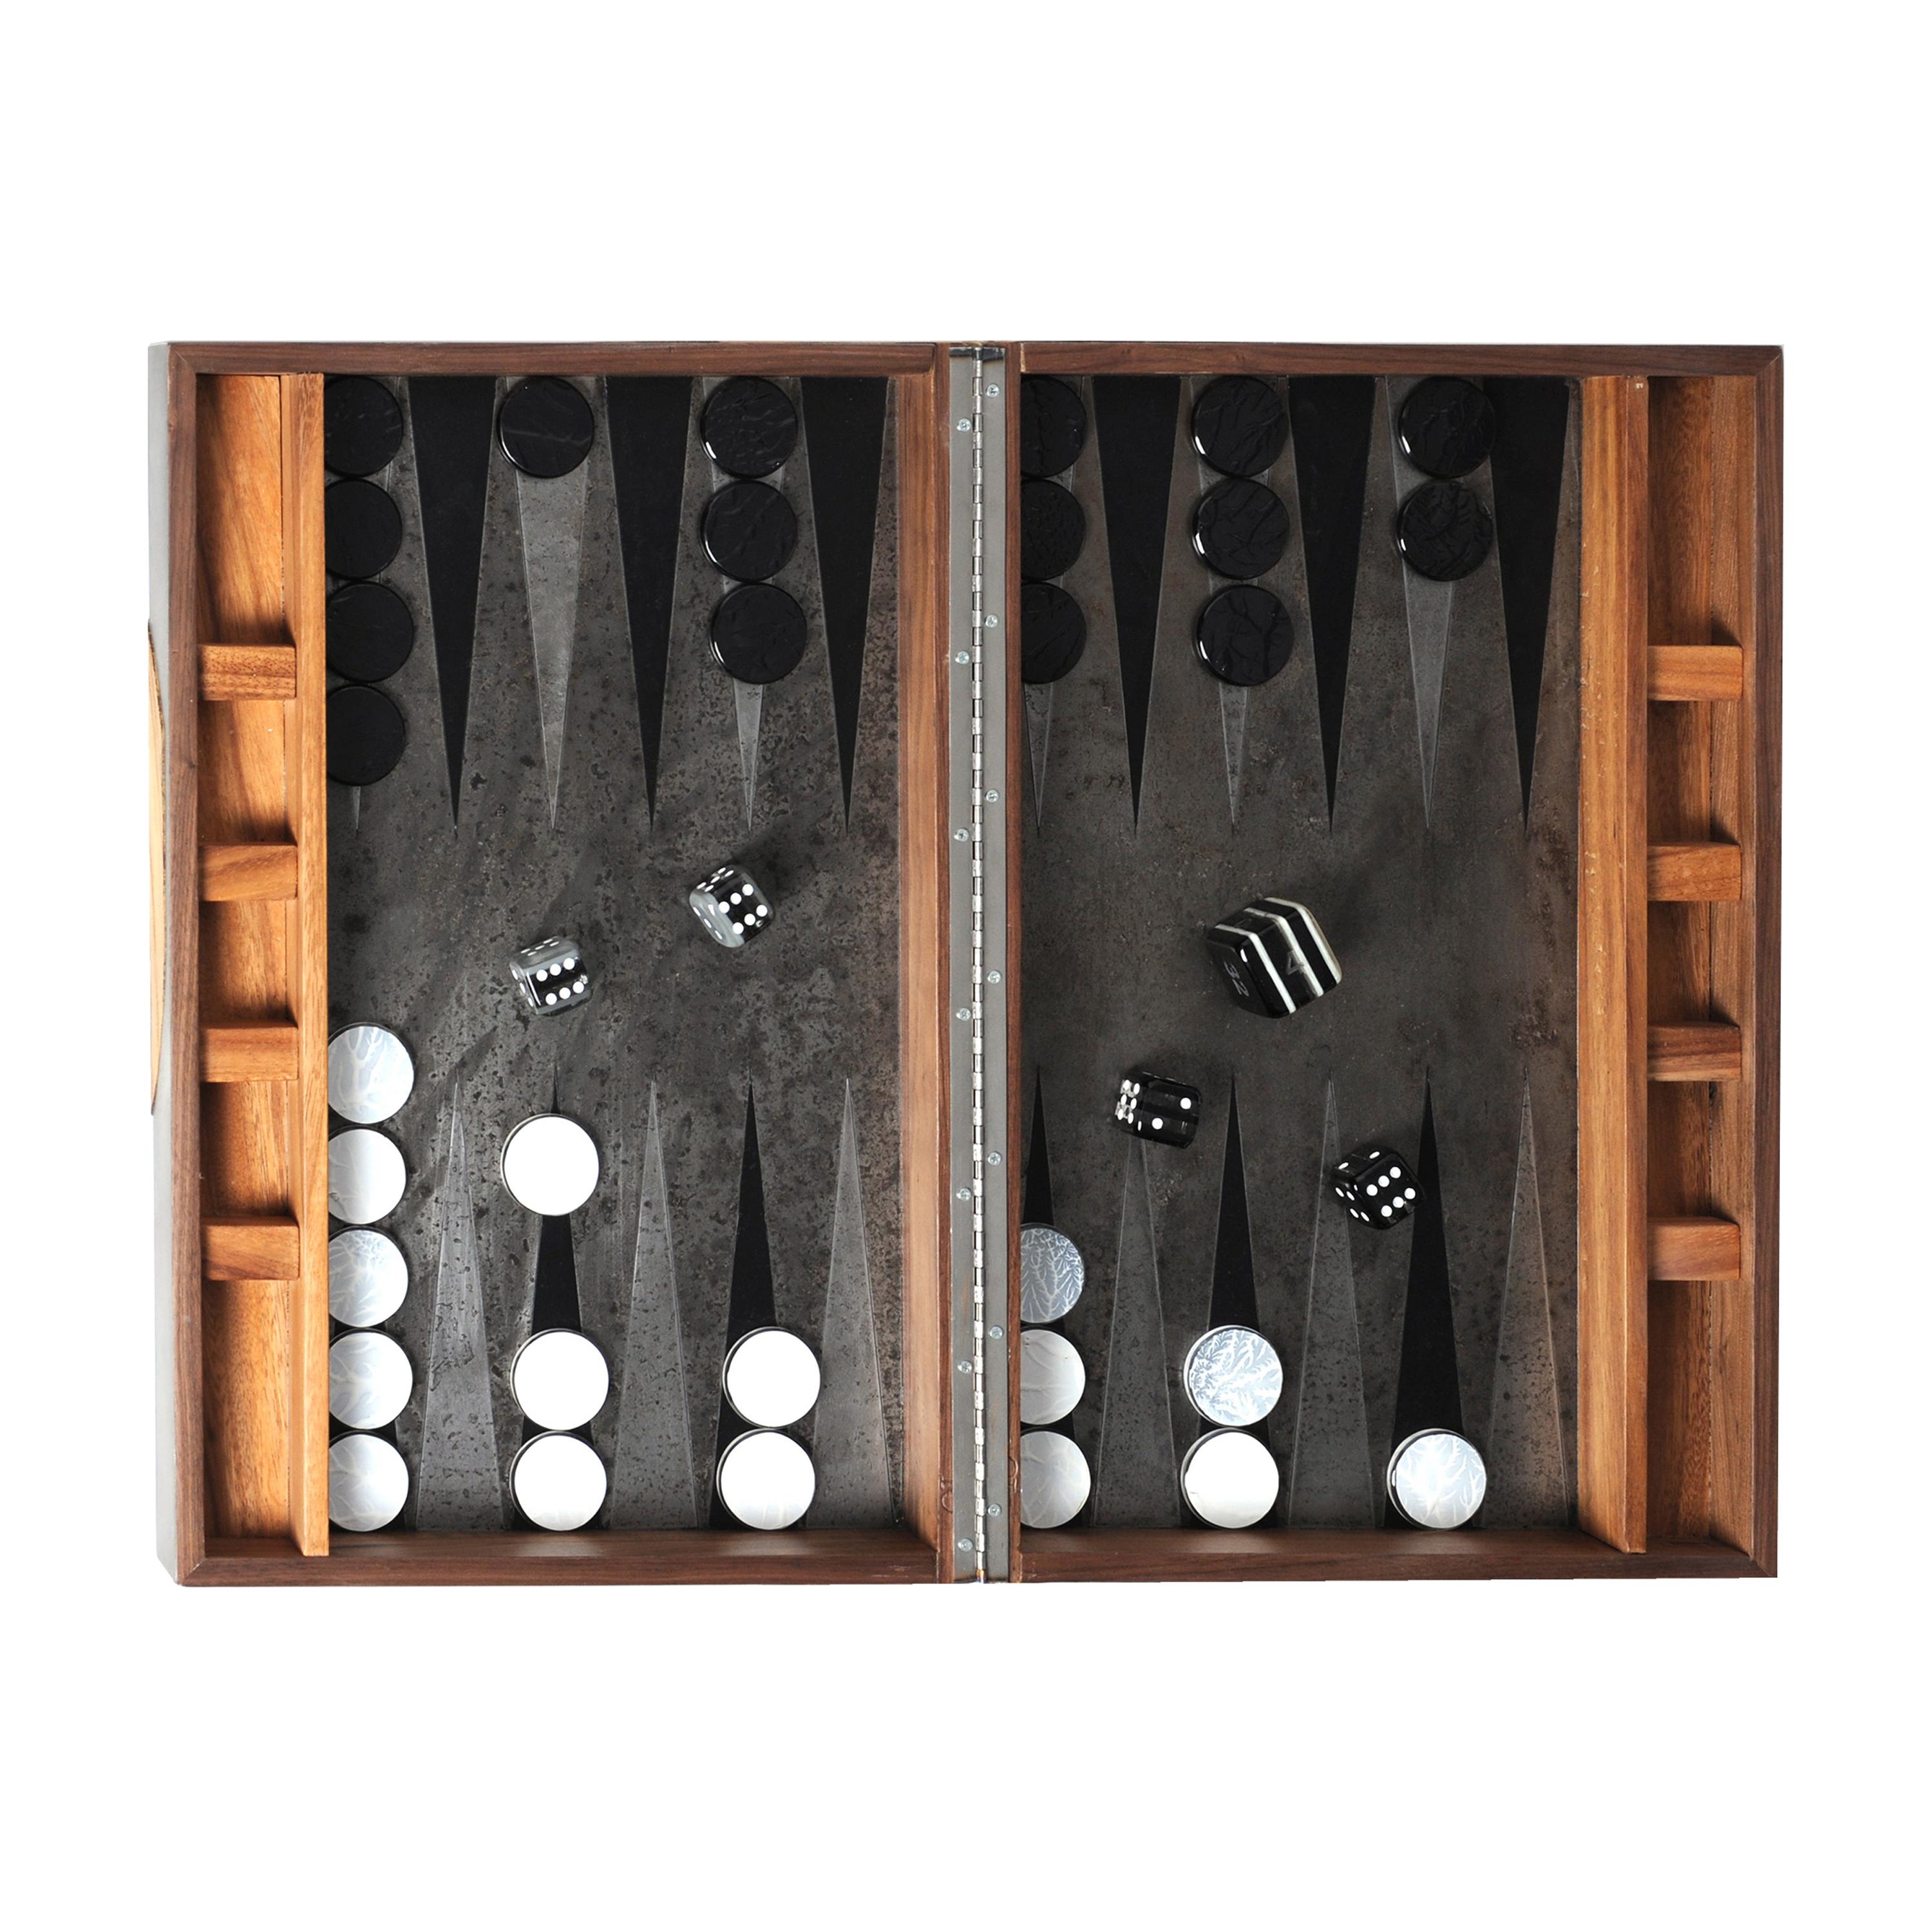 Backgammon Roarshax Wood Case with Glass Chips and Dice For Sale